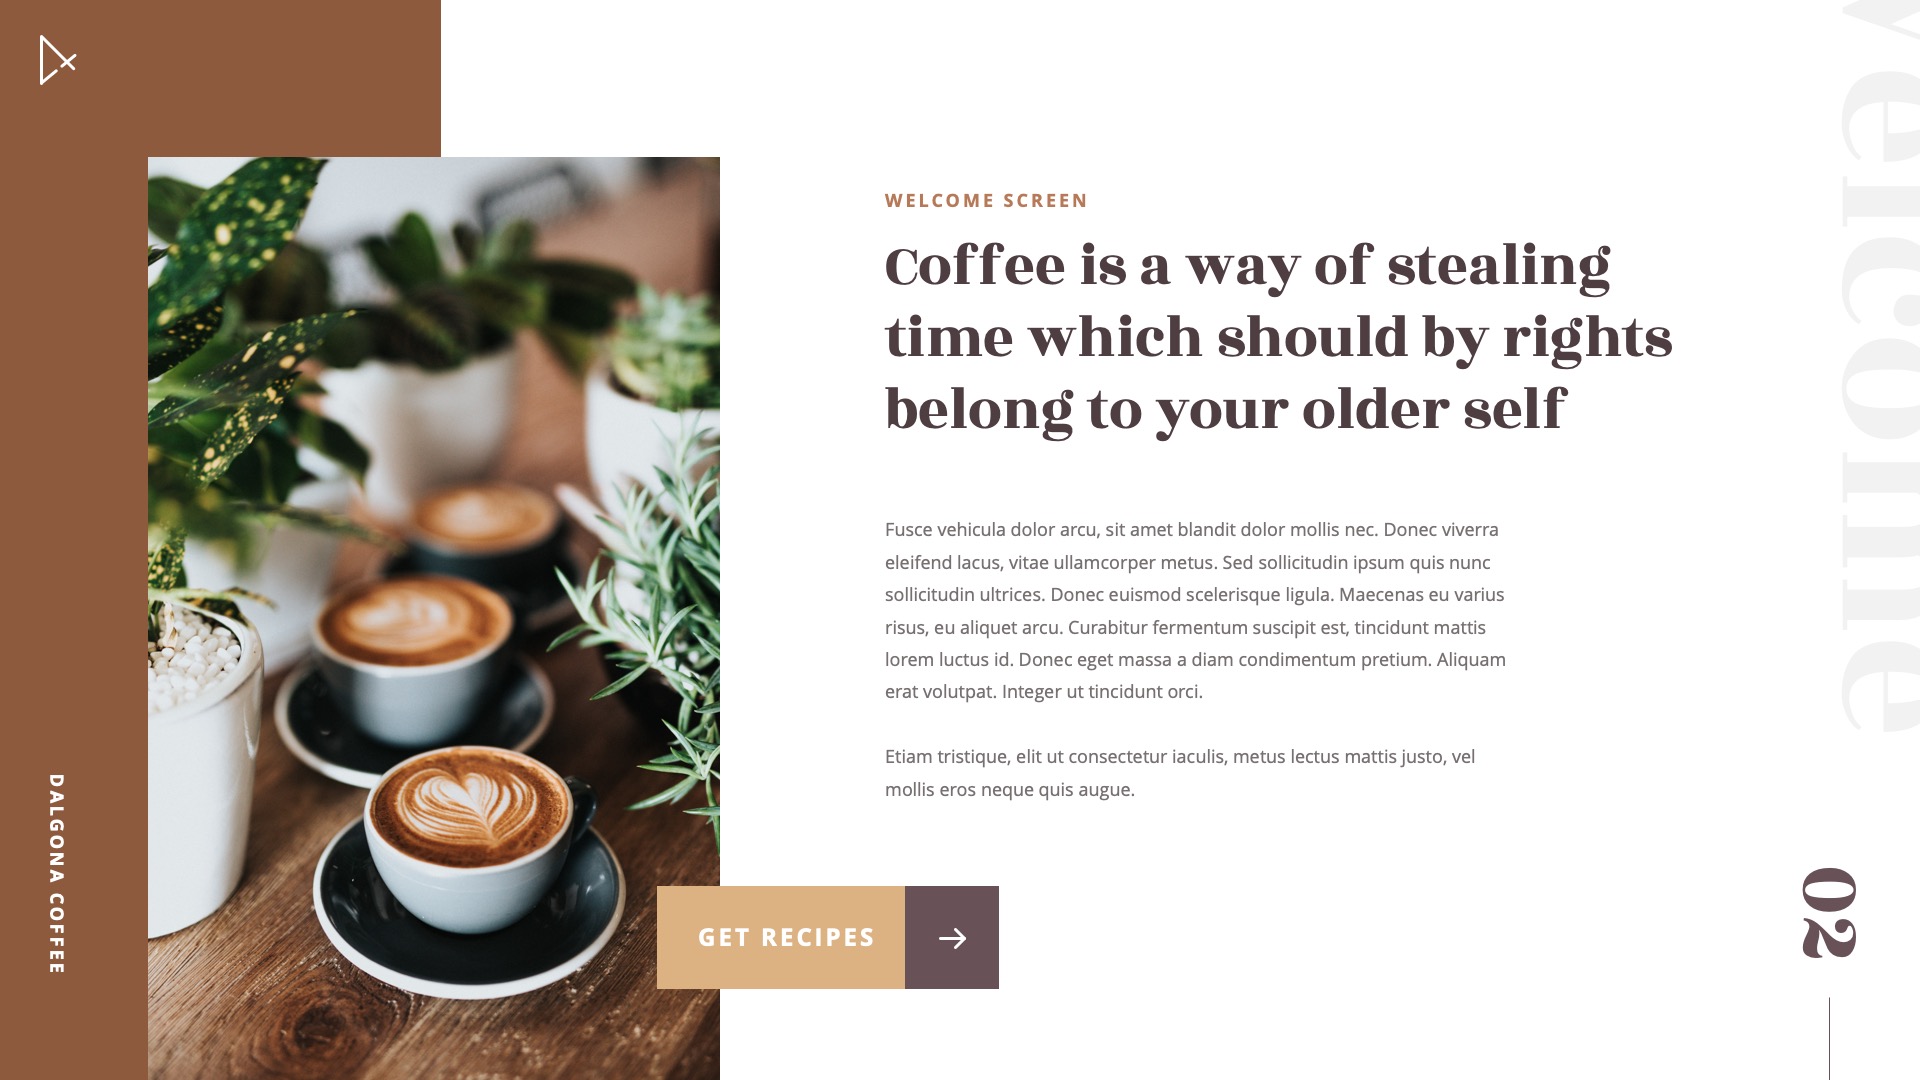 DALGONA - Coffee Shop & Cafe Powerpoint Template